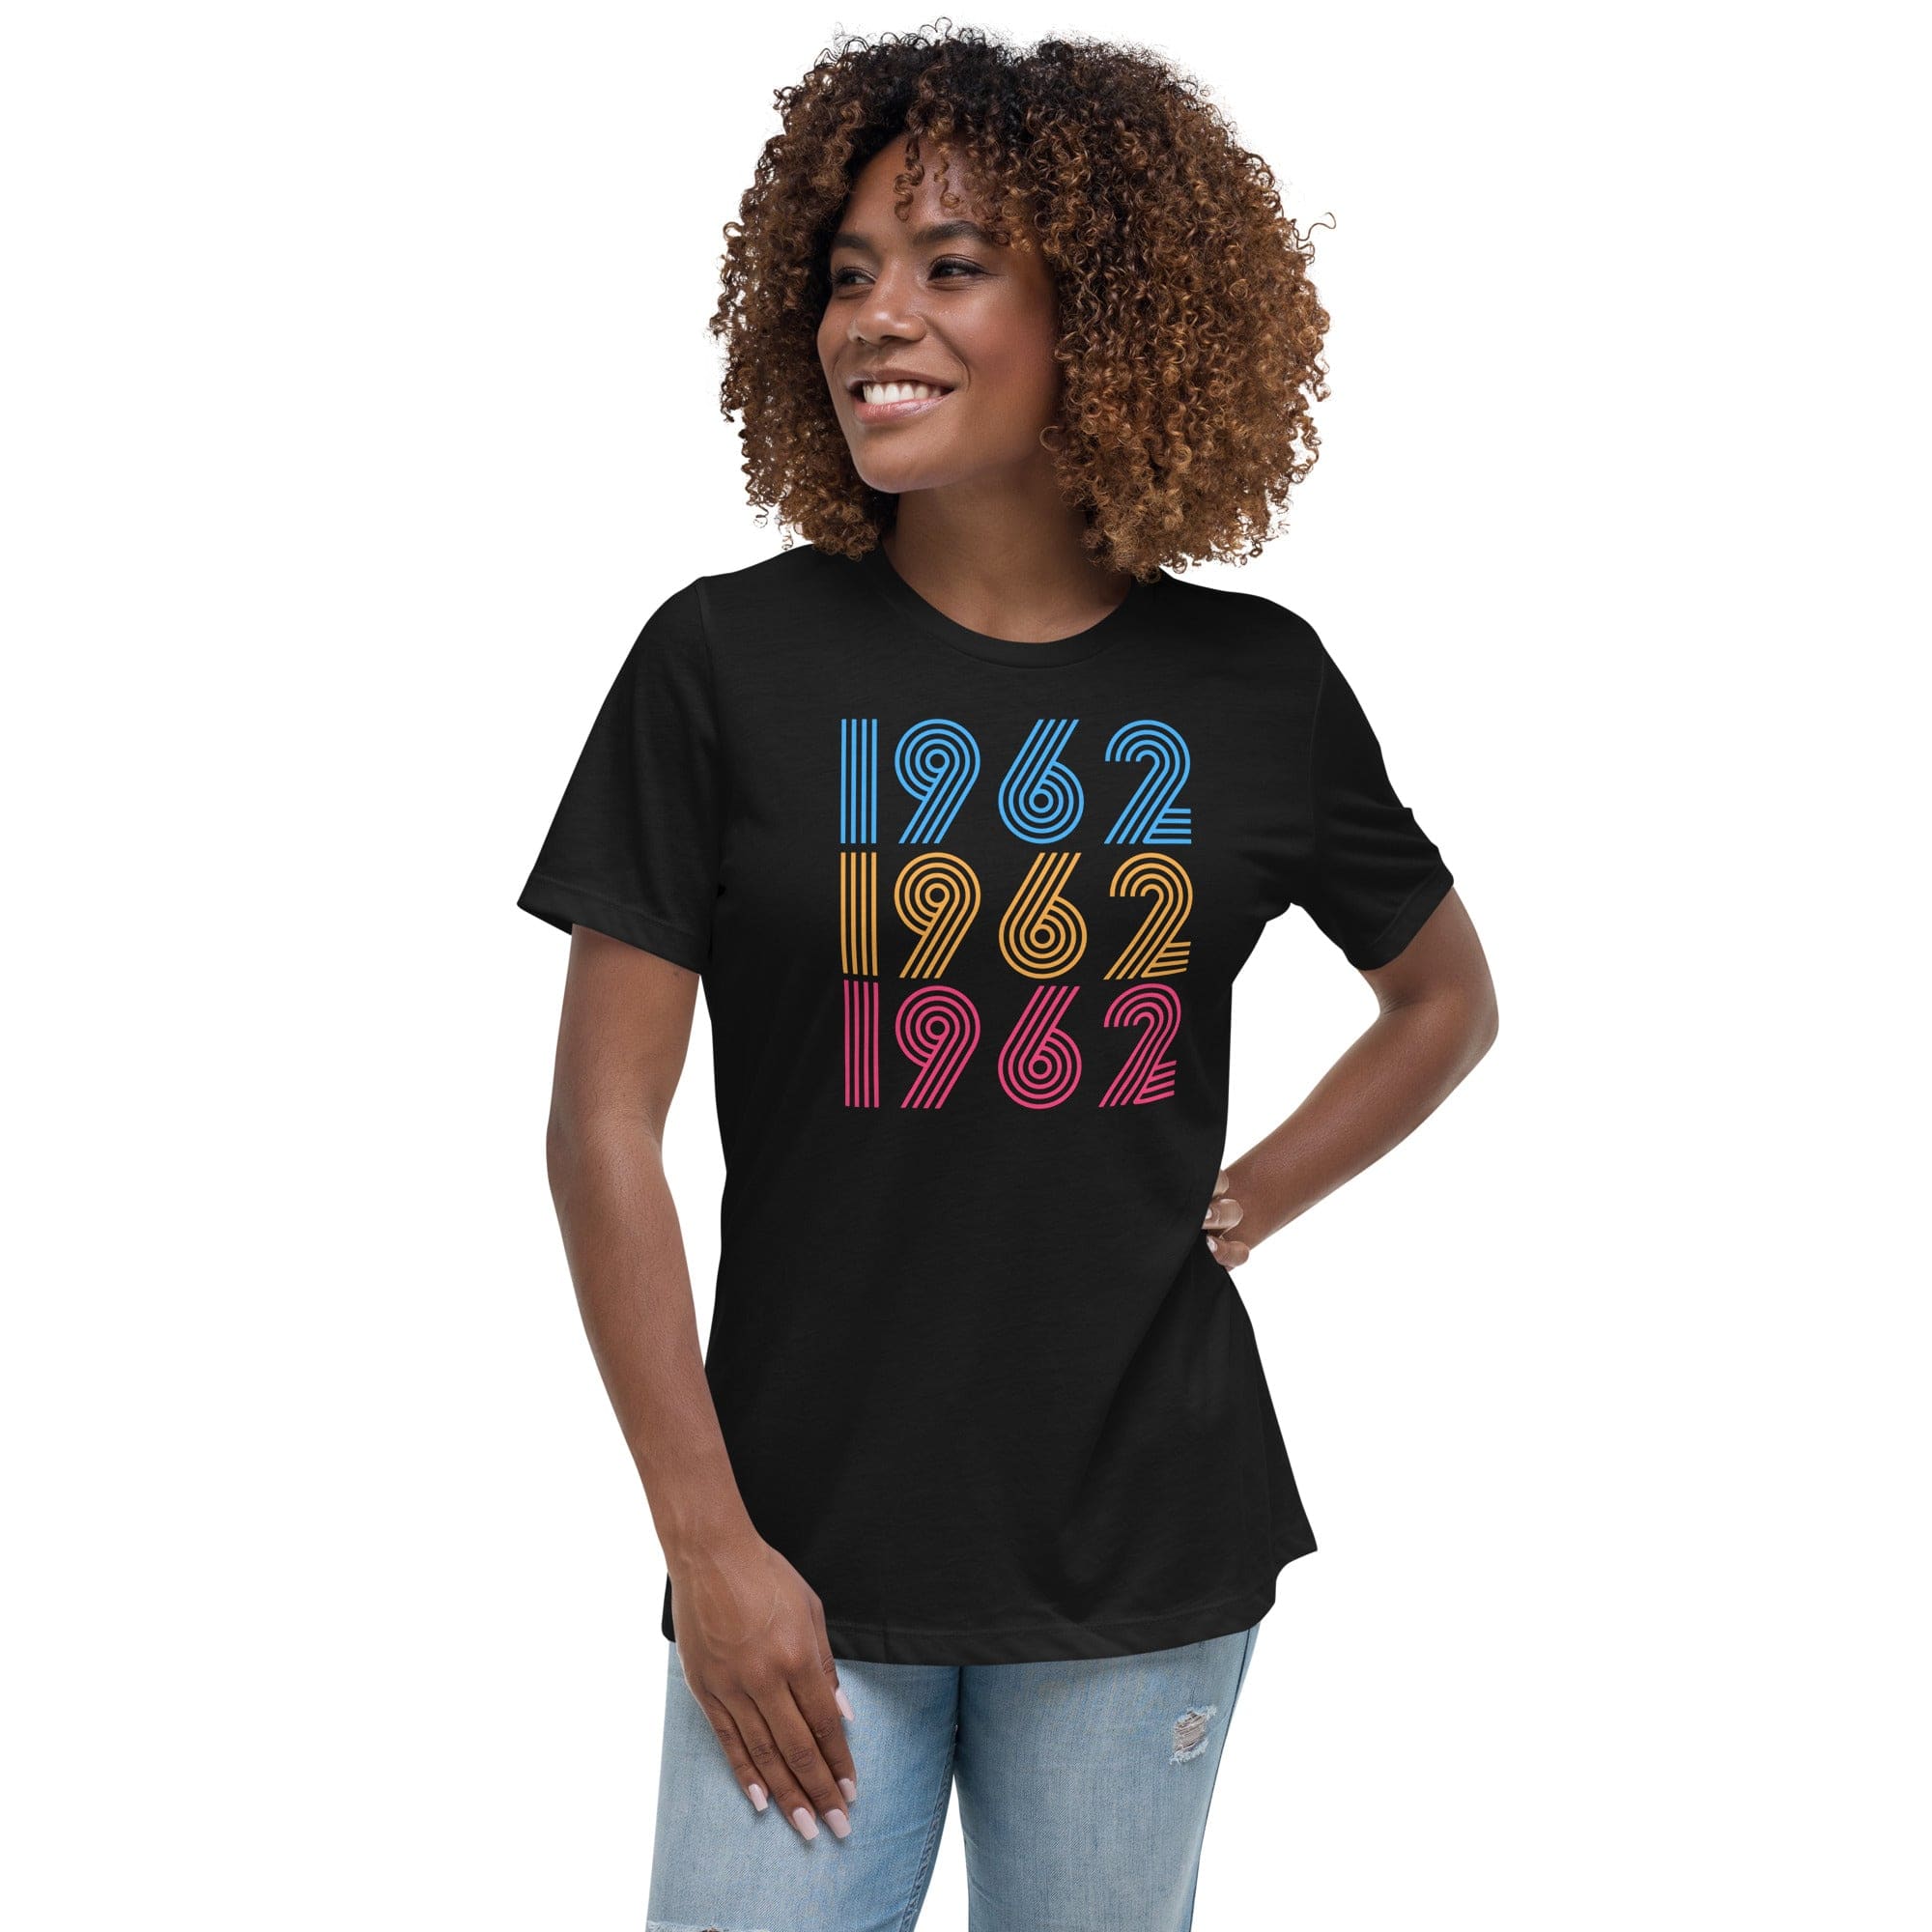 Spruced Roost Women's Clothing Black / S Vintage 1962 60th Birthday - Celebrate - Happy Birthday -  S-3X